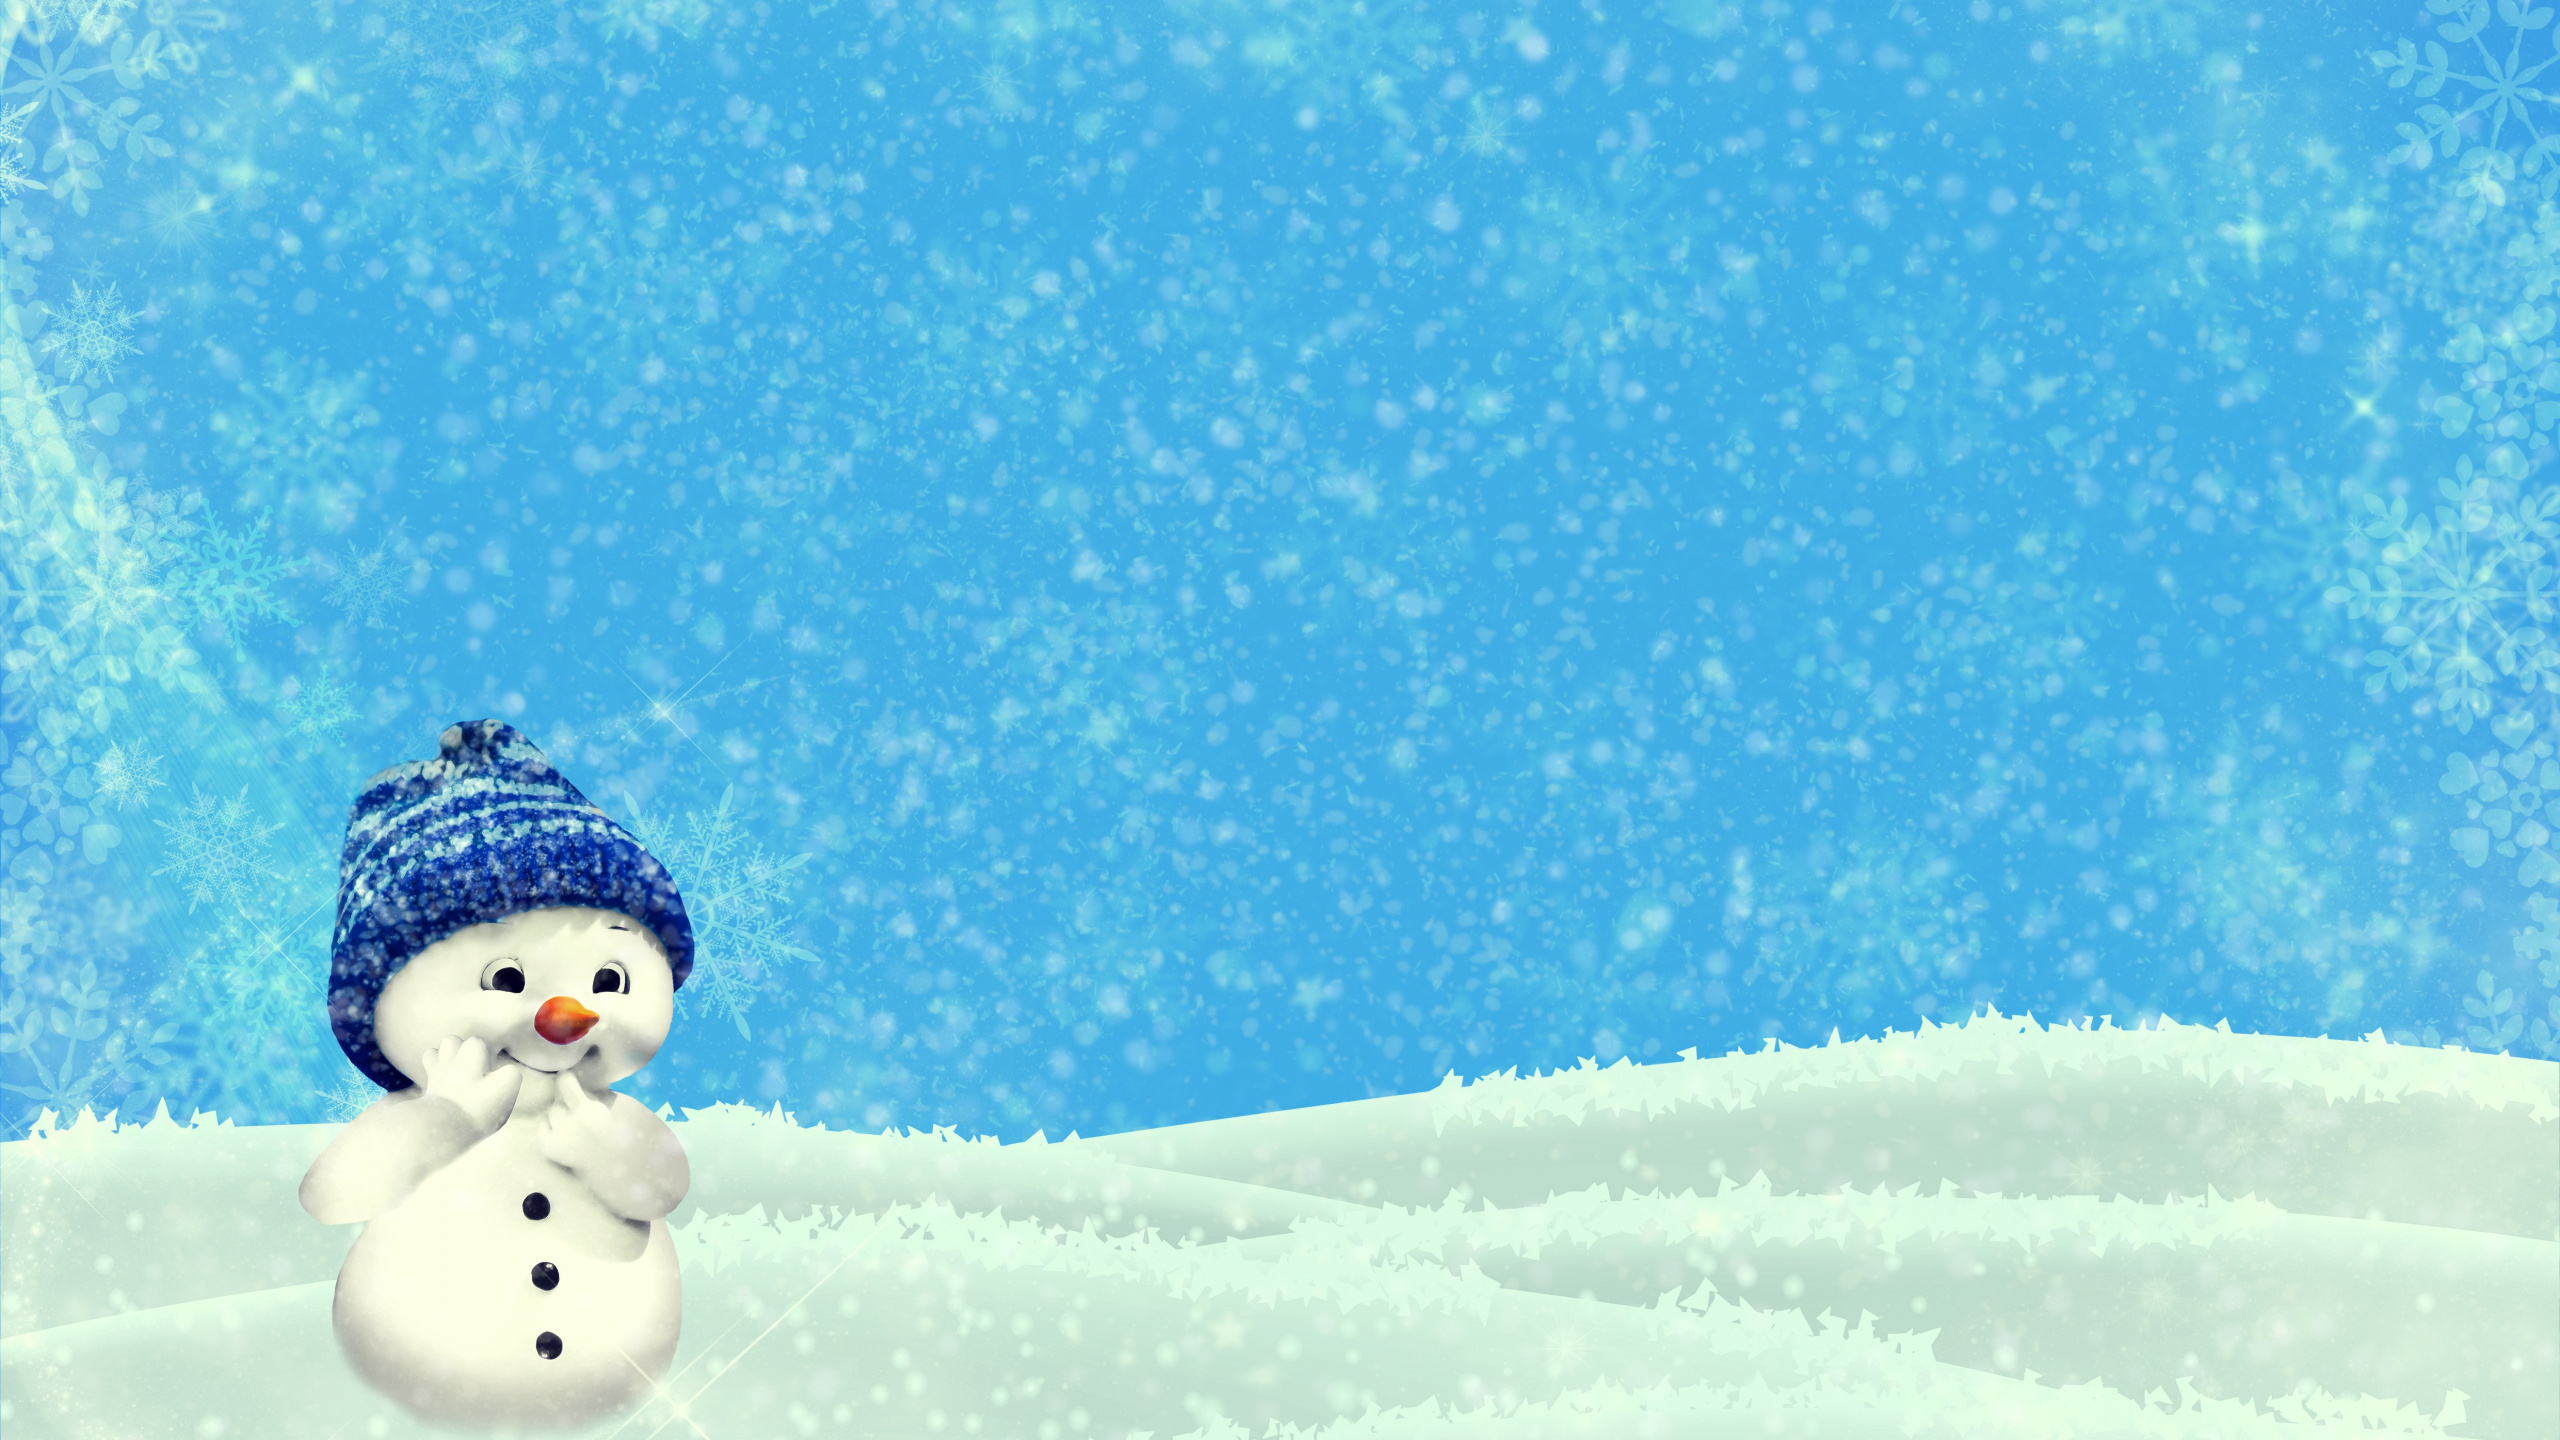 Snowman, Christmas Day, Snow, Winter, Freezing. Wallpaper in 2560x1440 Resolution